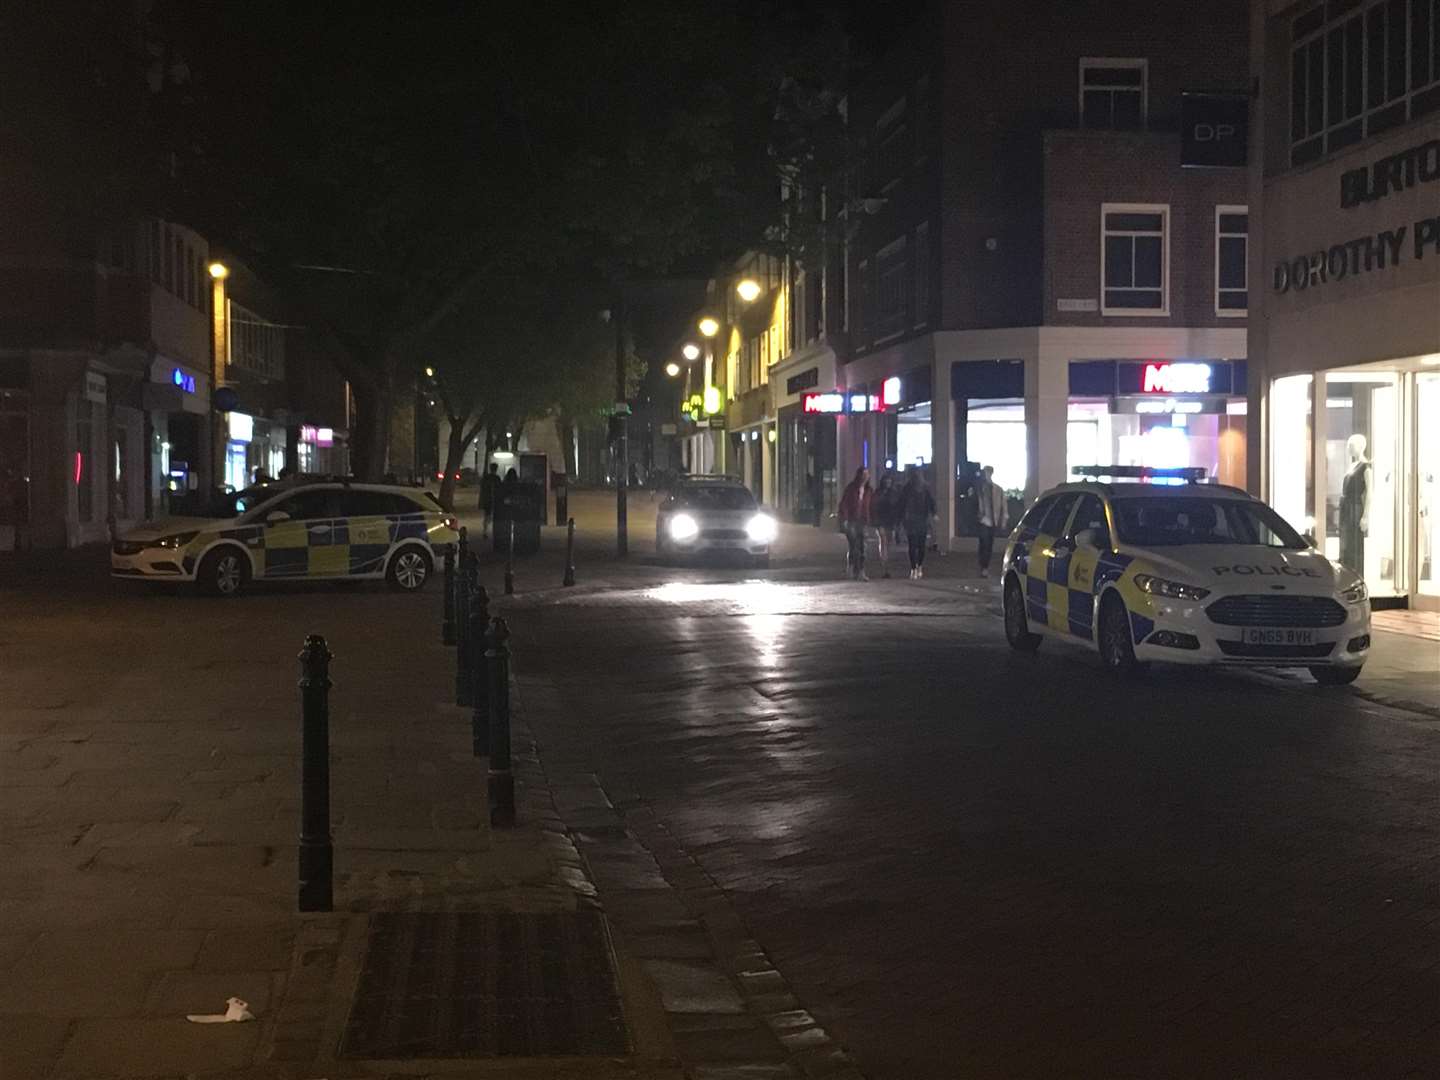 The assault allegedly happened in the Longmarket area